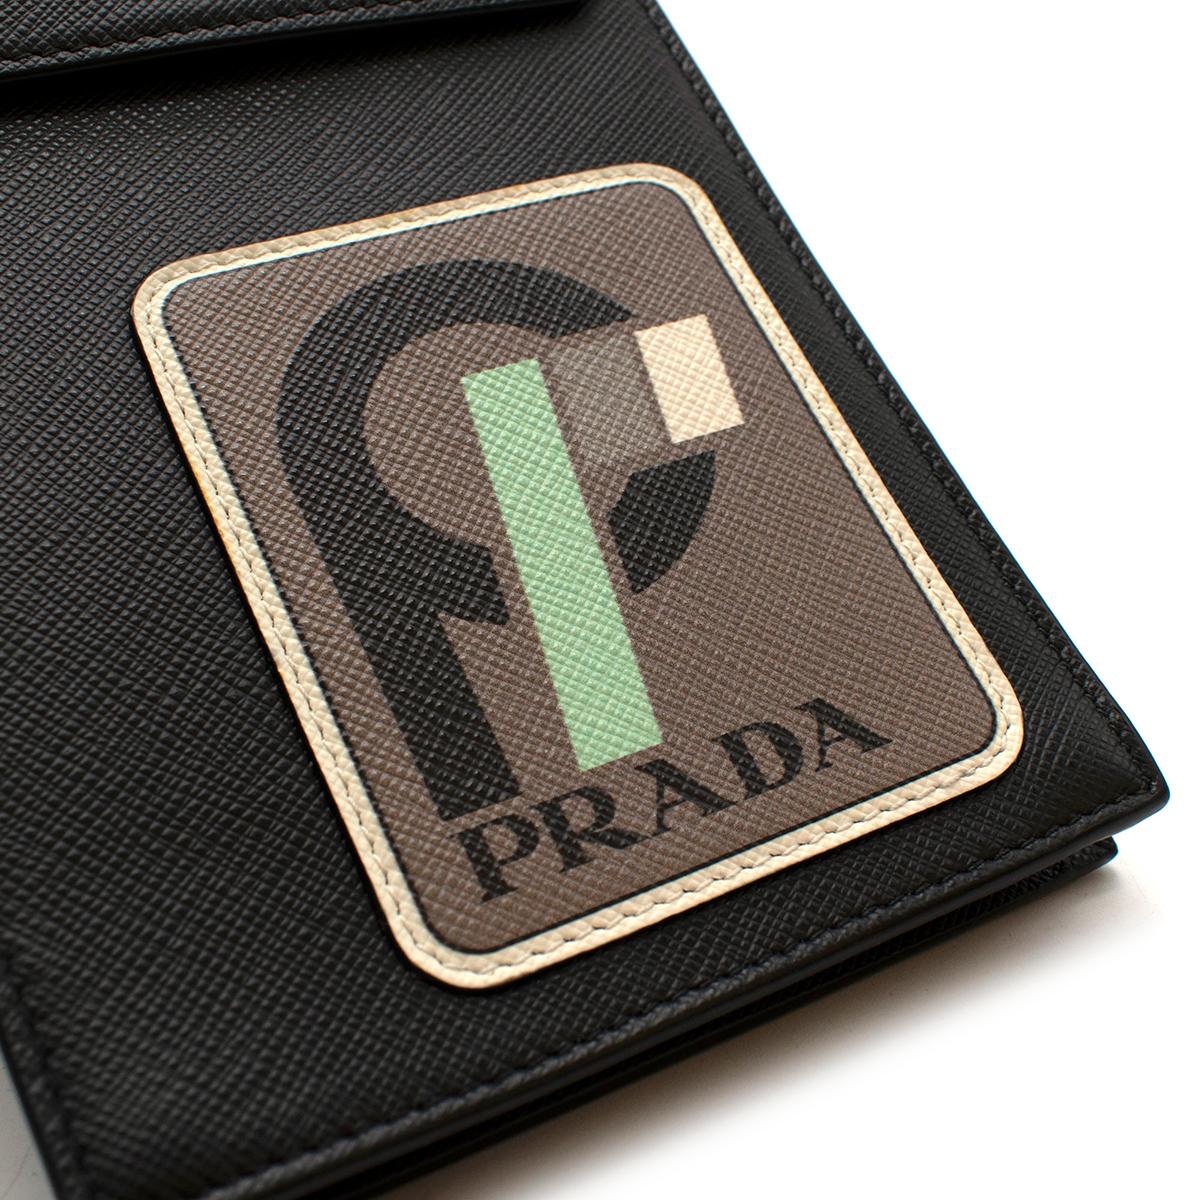 Prada Runway Black Saffiano Leather Smartphone Case

This Saffiano leather cellphone case can be conveniently worn with a shoulder strap and has a badge holder on the back. The flap closes with a snap button and the front is decorated with a leather